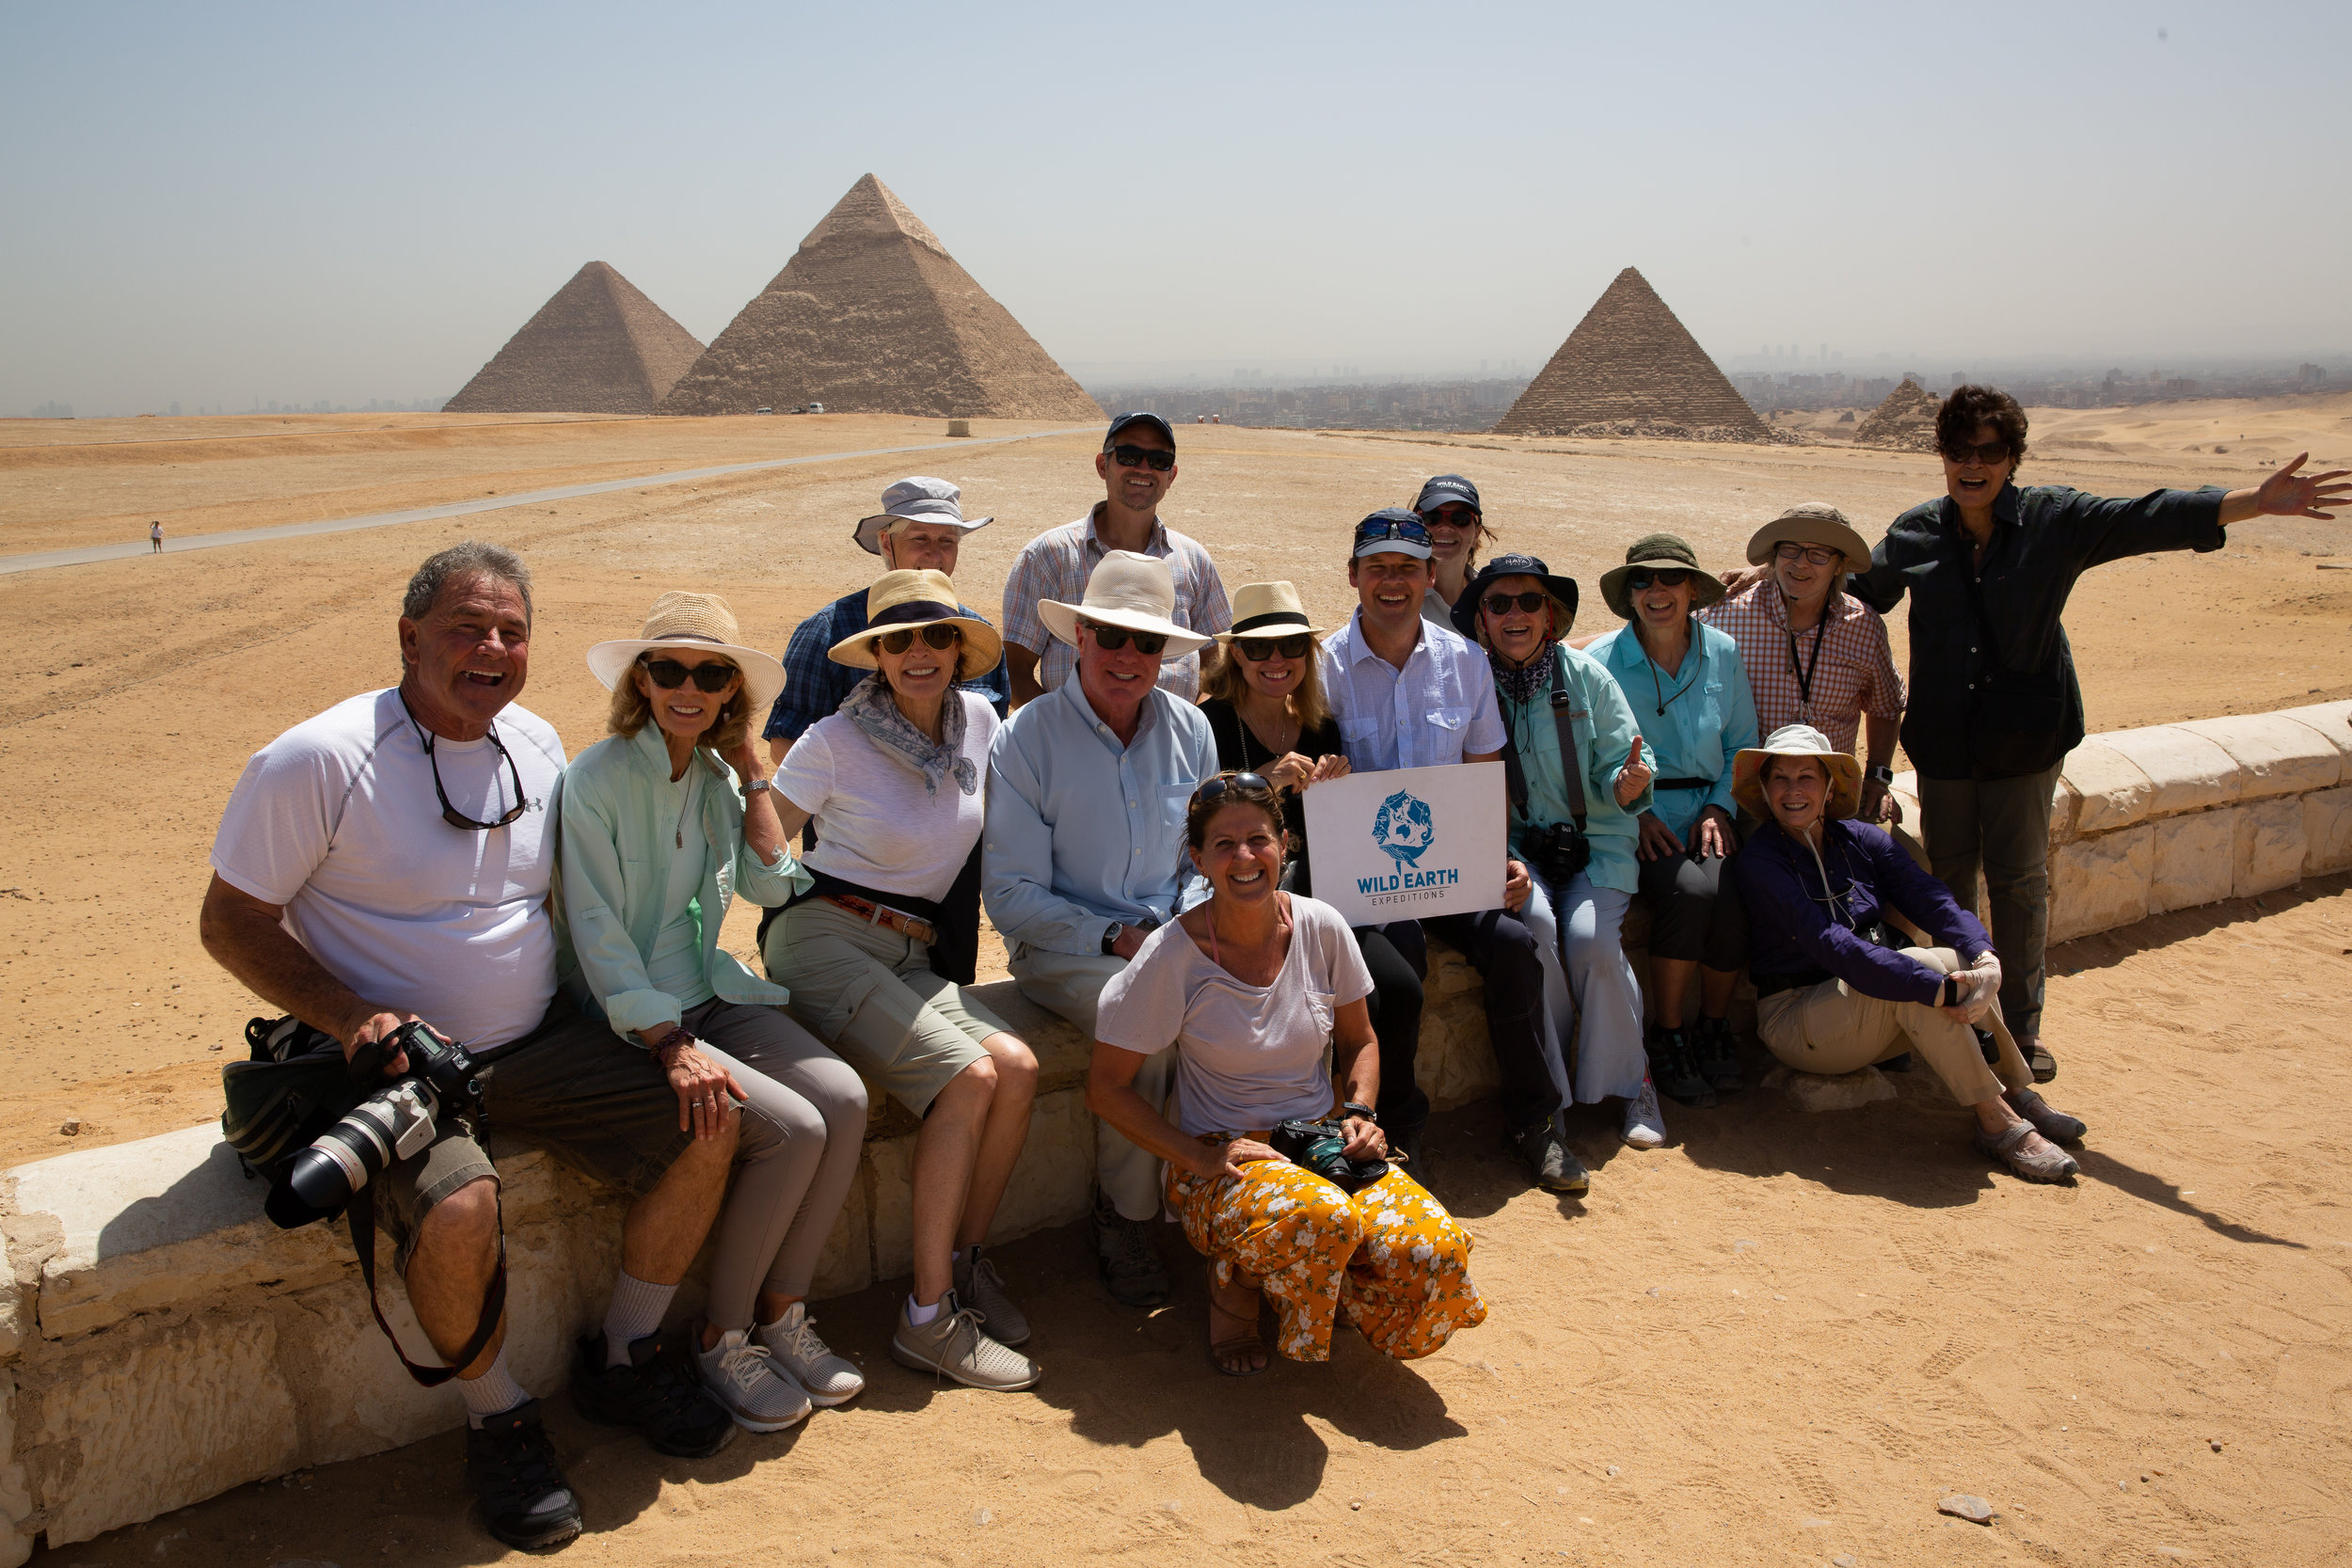 The Great Pyramids, Cairo - Egypt - Wild Earth Expeditions